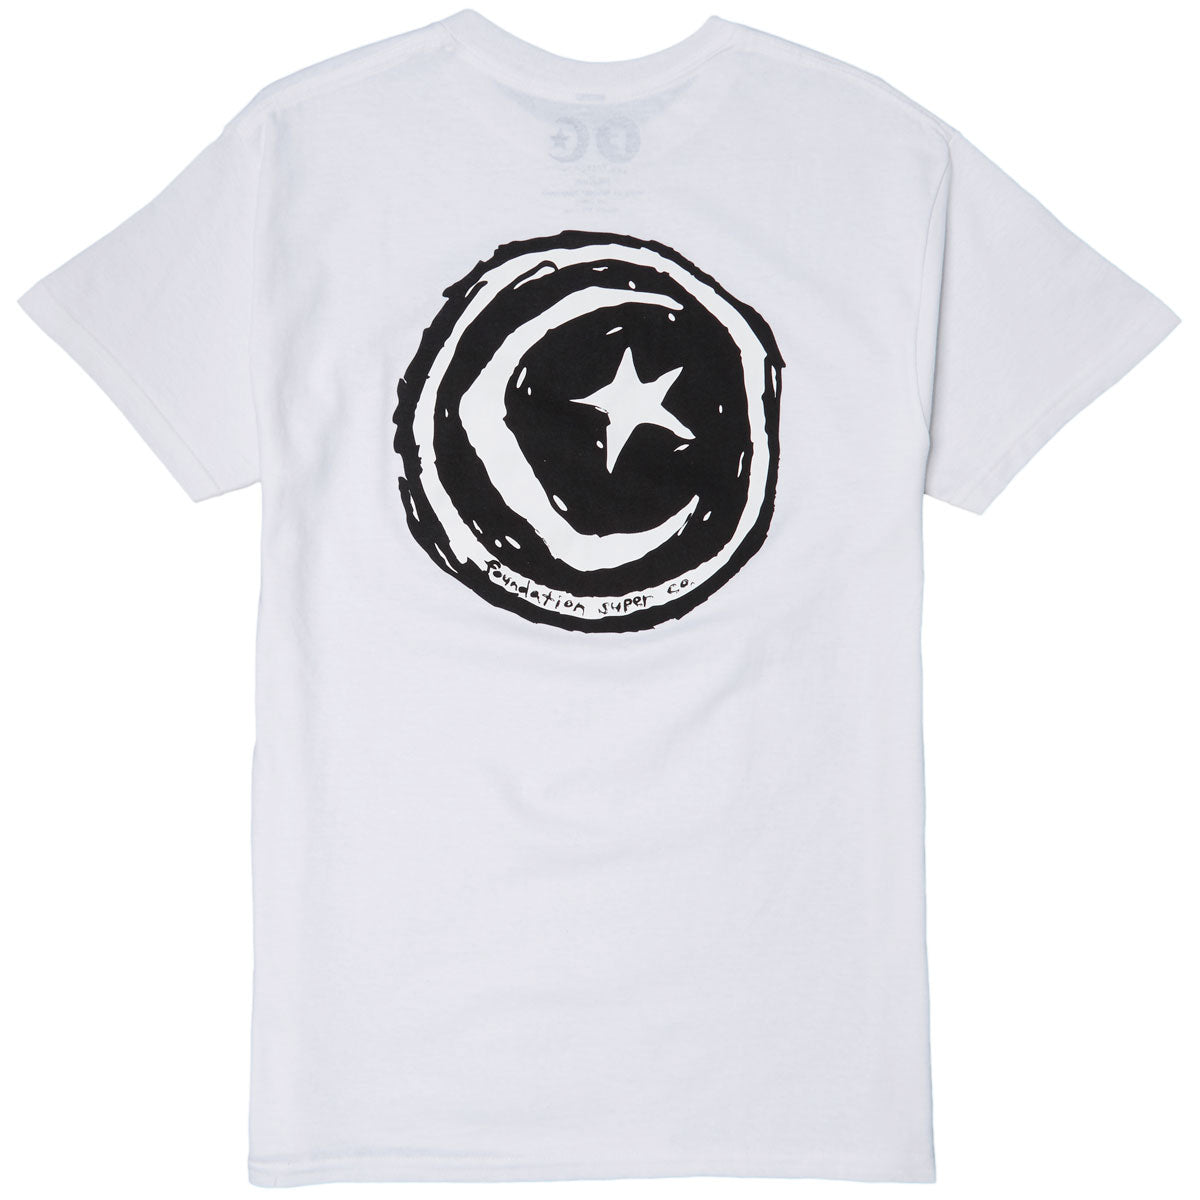 Foundation Star And Moon T-Shirt - White image 1